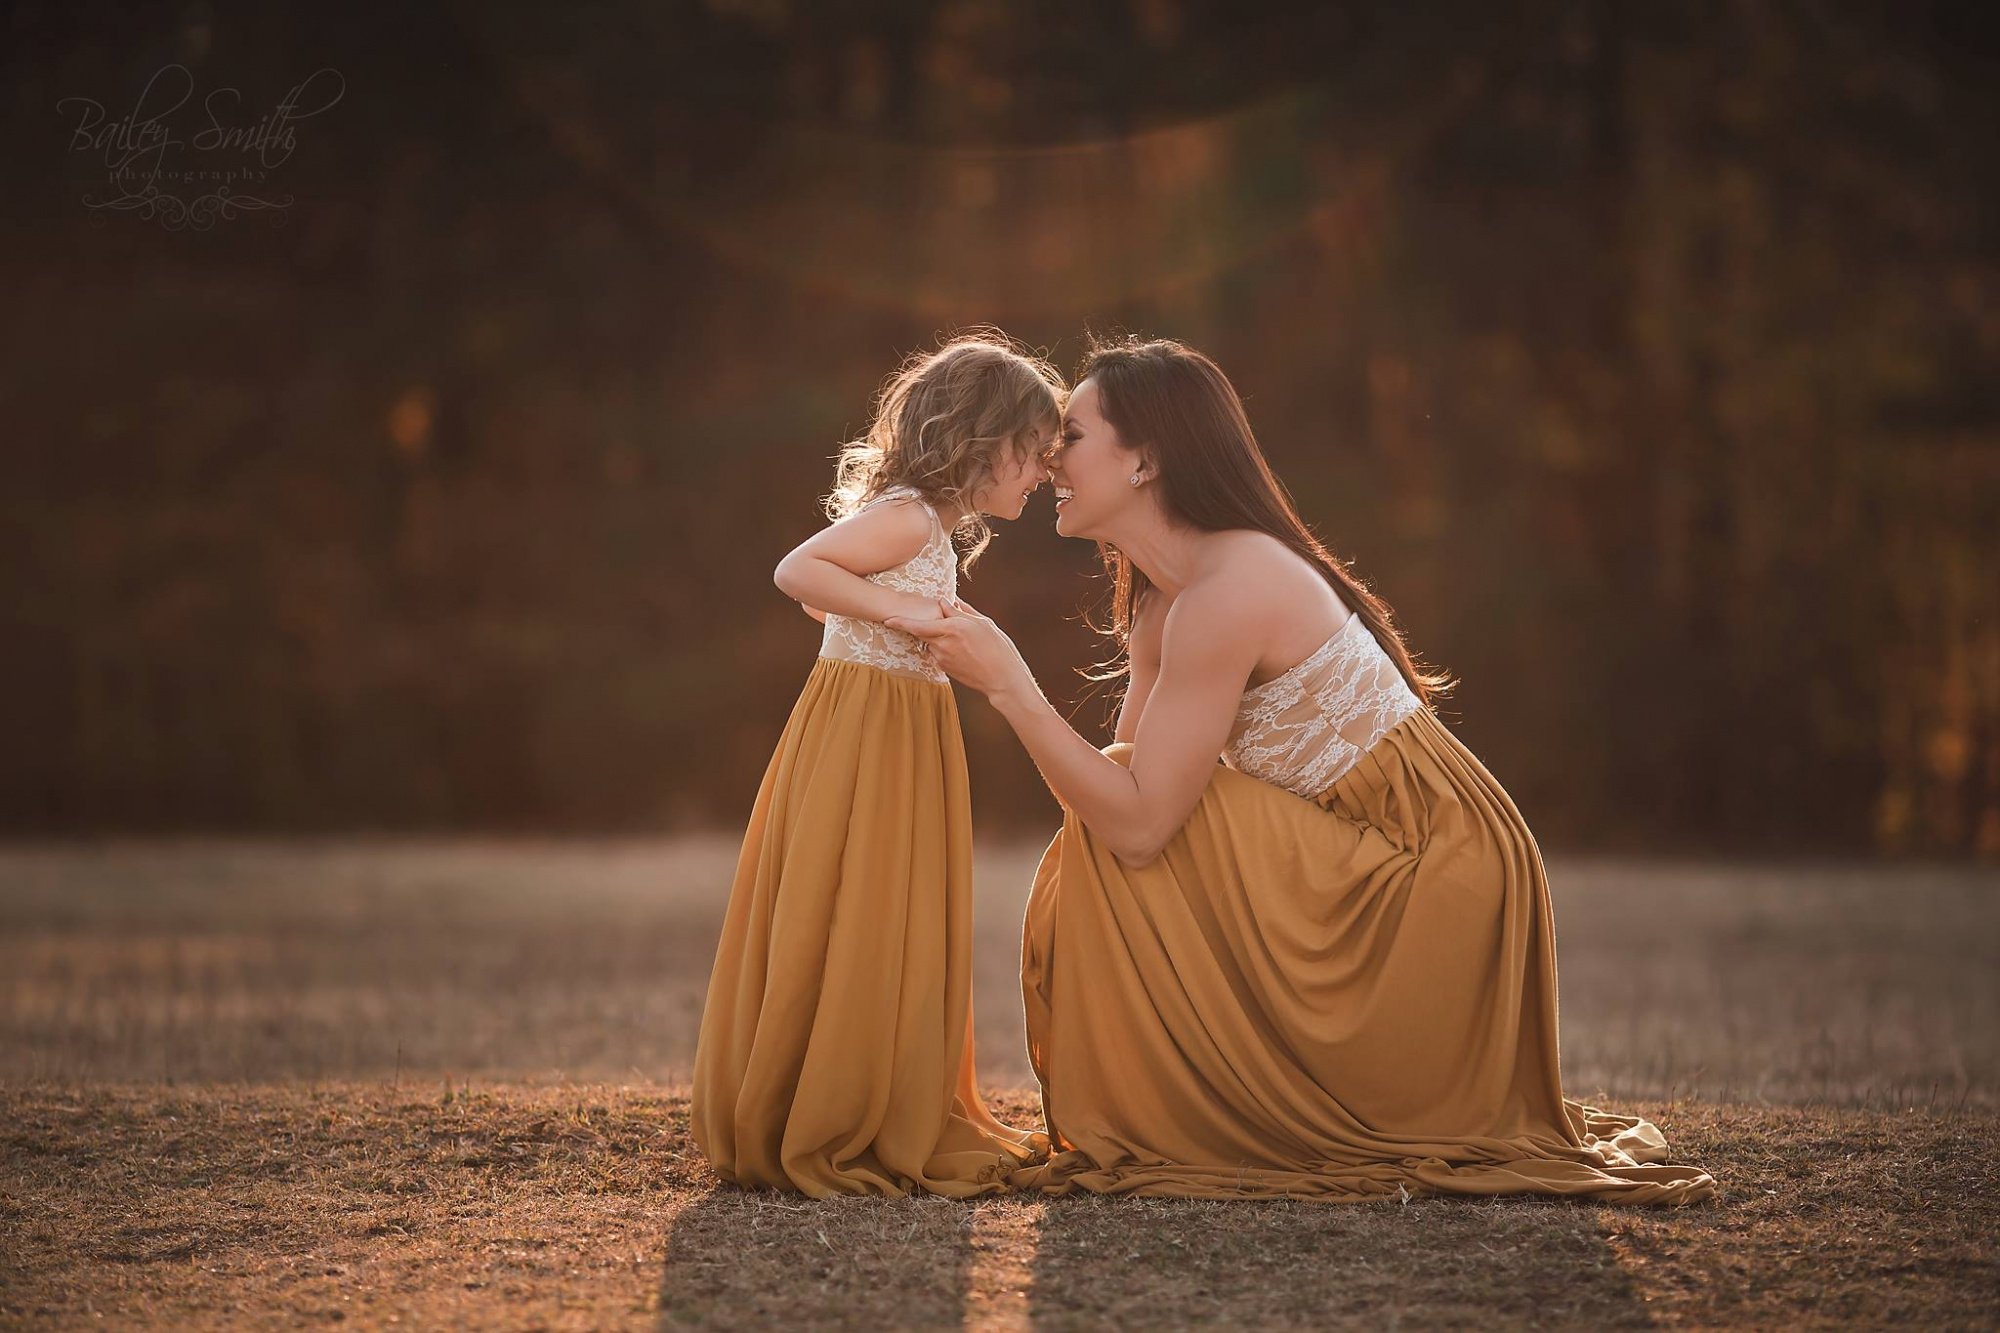 mommy and me photoshoot ideas image 